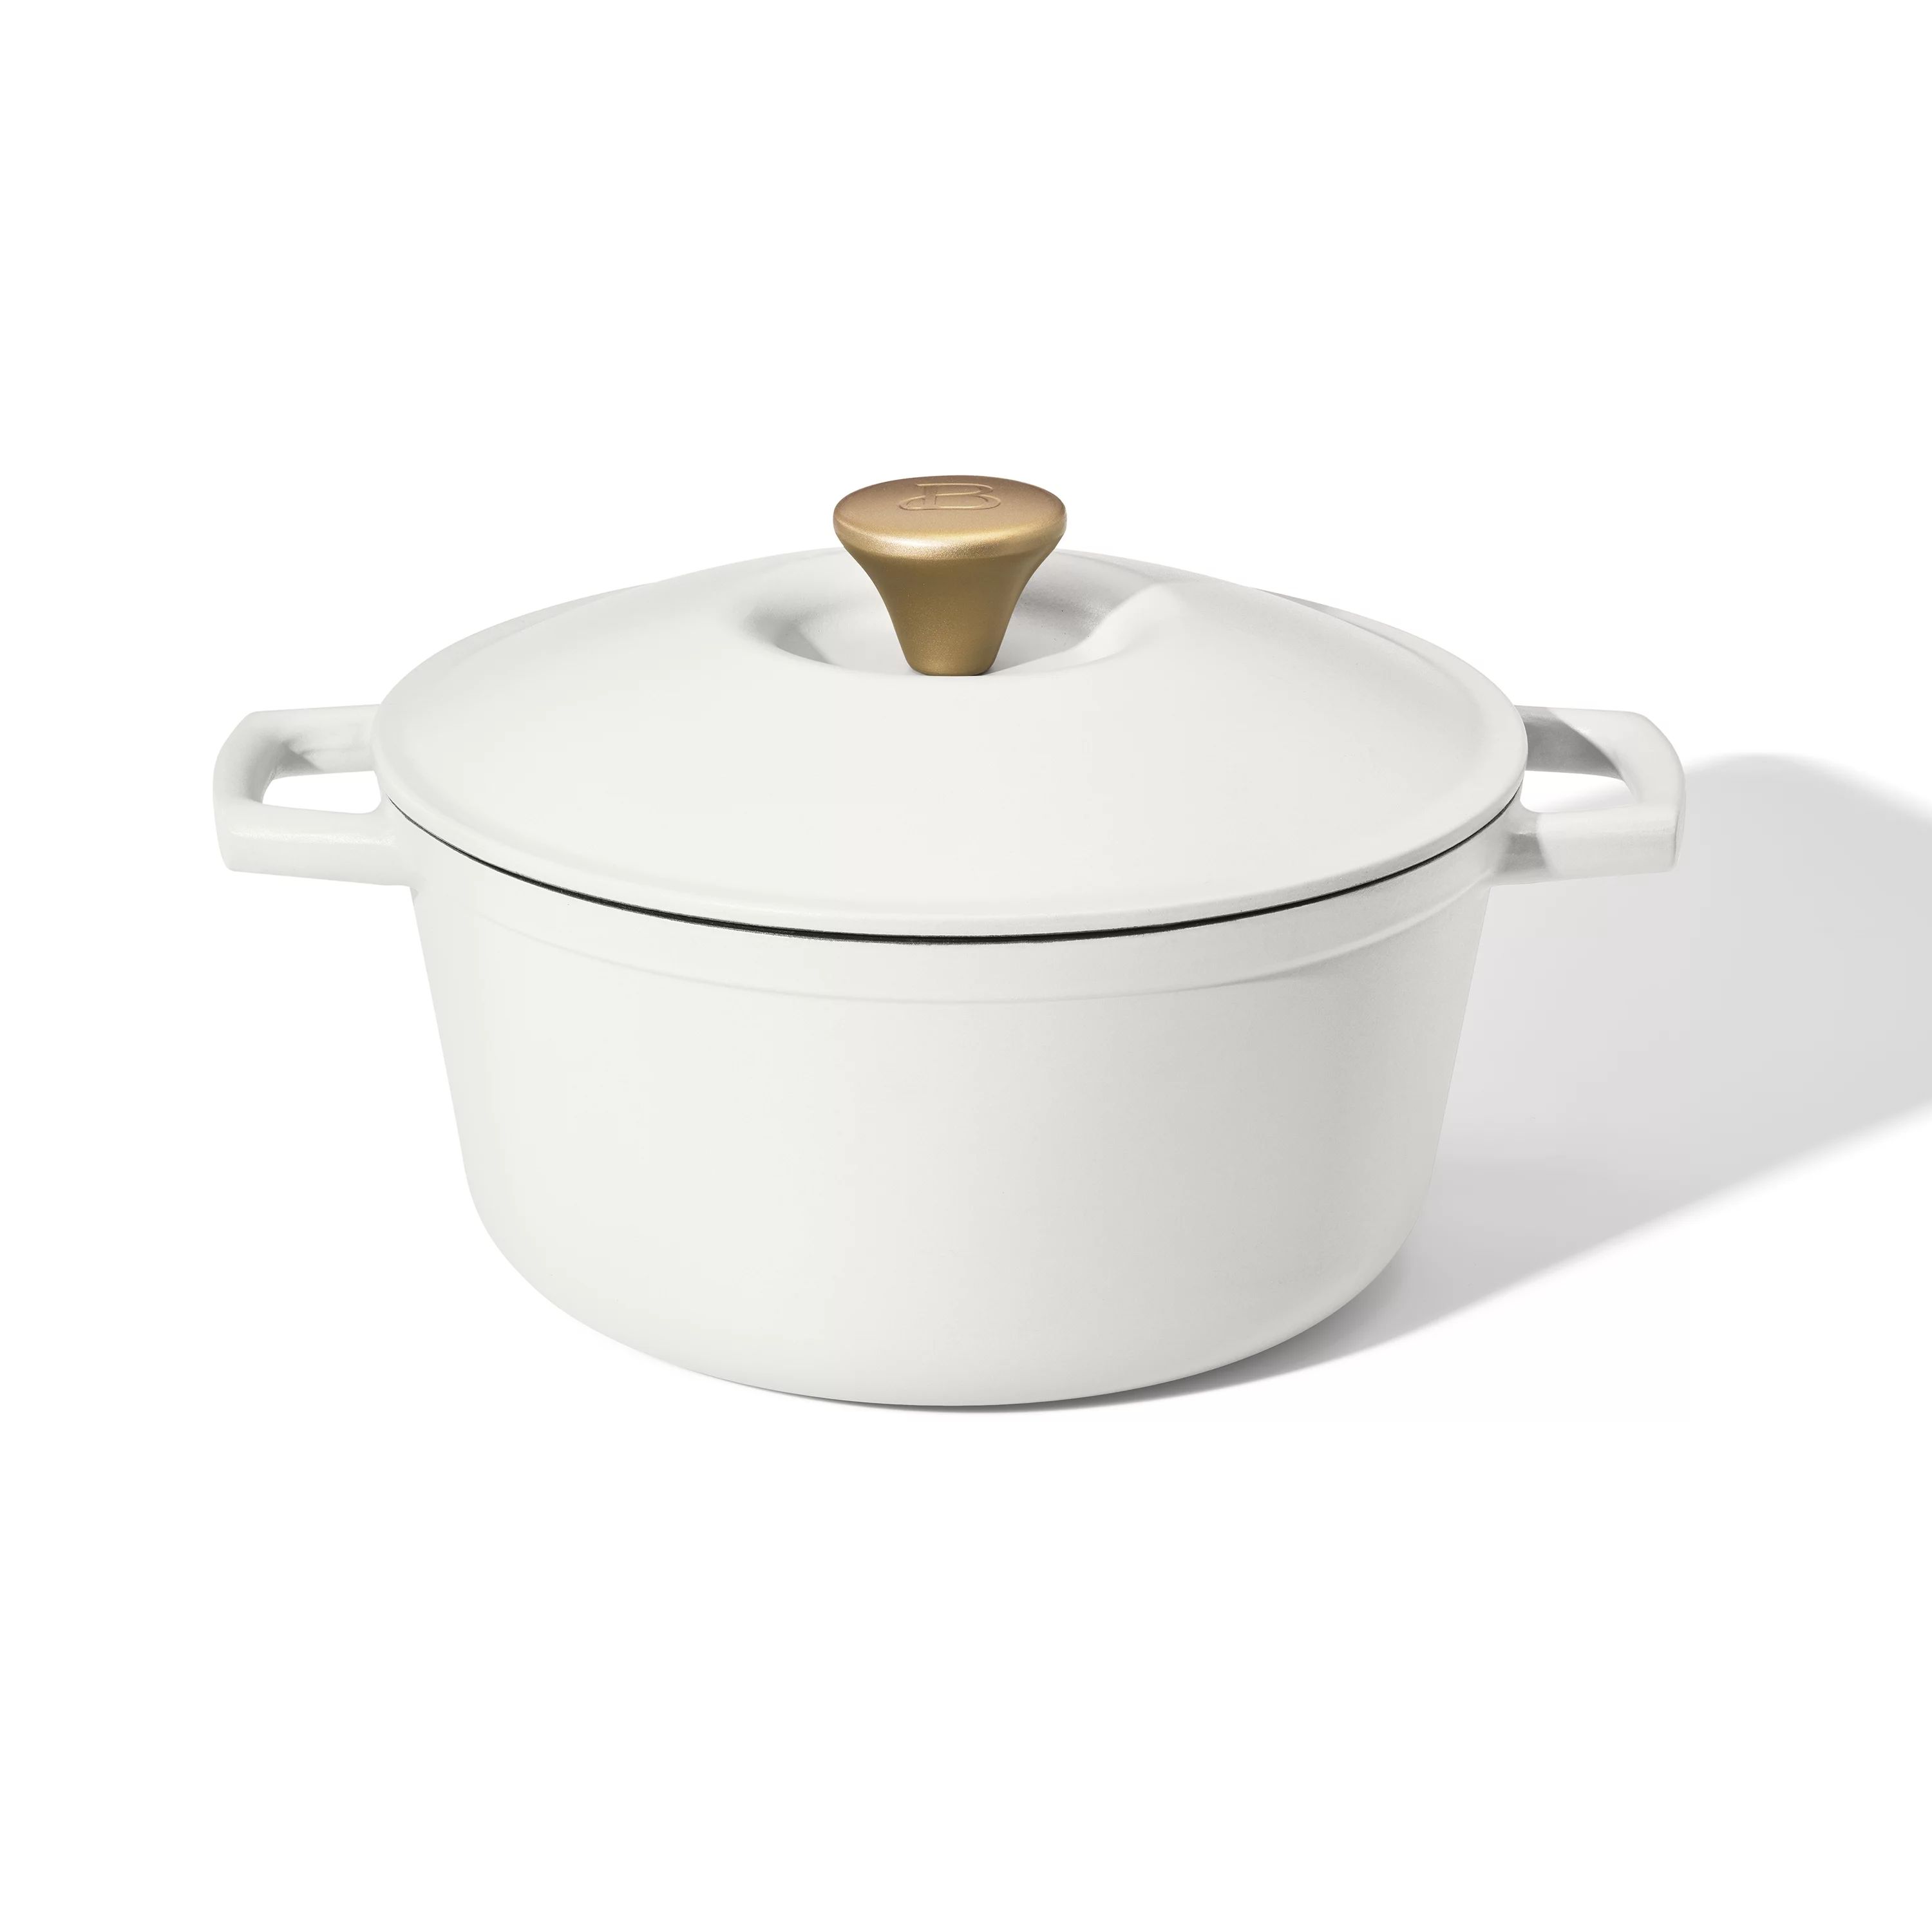 Beautiful 5 Quart Cast Iron Round Dutch Oven, White Icing by Drew Barrymore | Walmart (US)